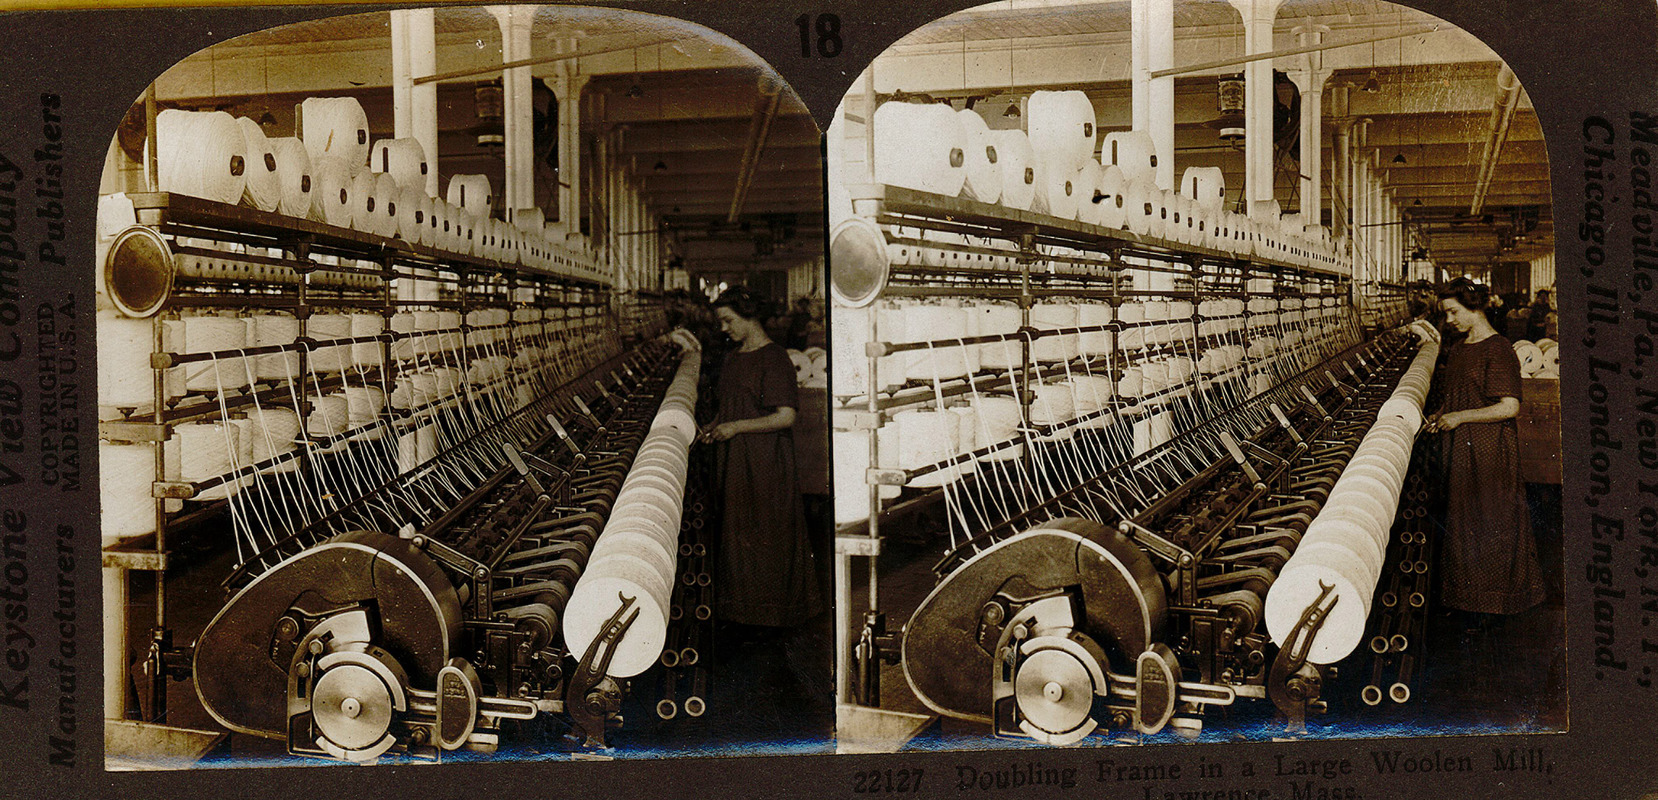 Doubling frame in a large woolen mill, Lawrence, Mass.